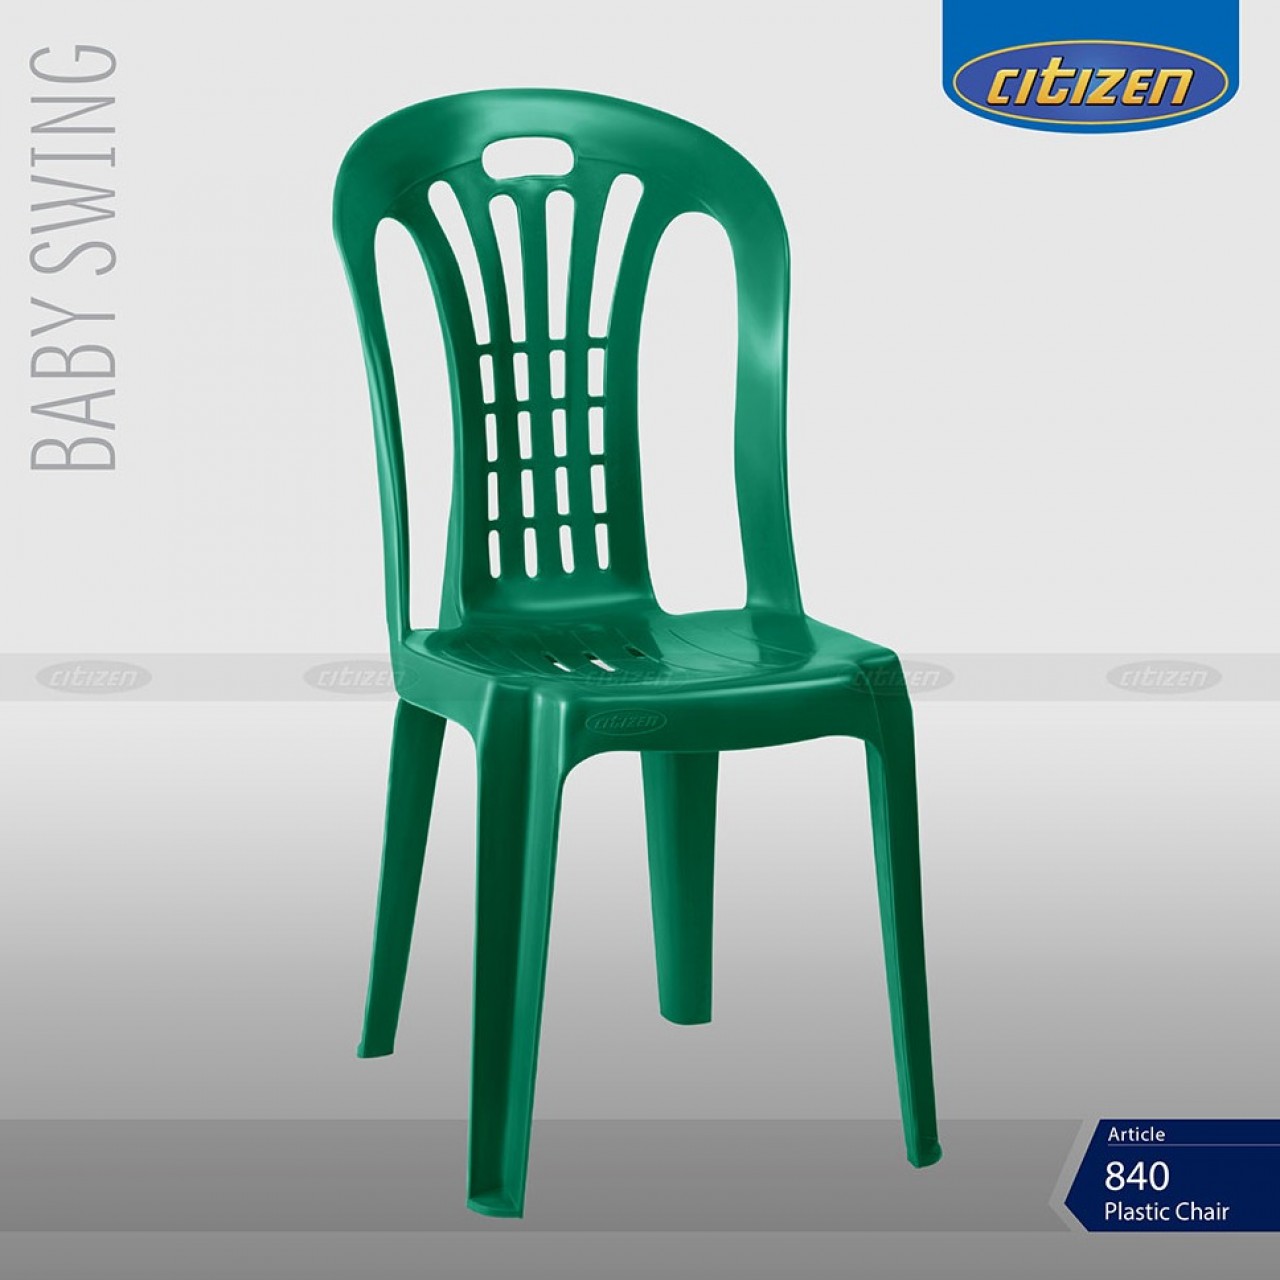 Citizen 840 Plastic Regular Chair Without Arms